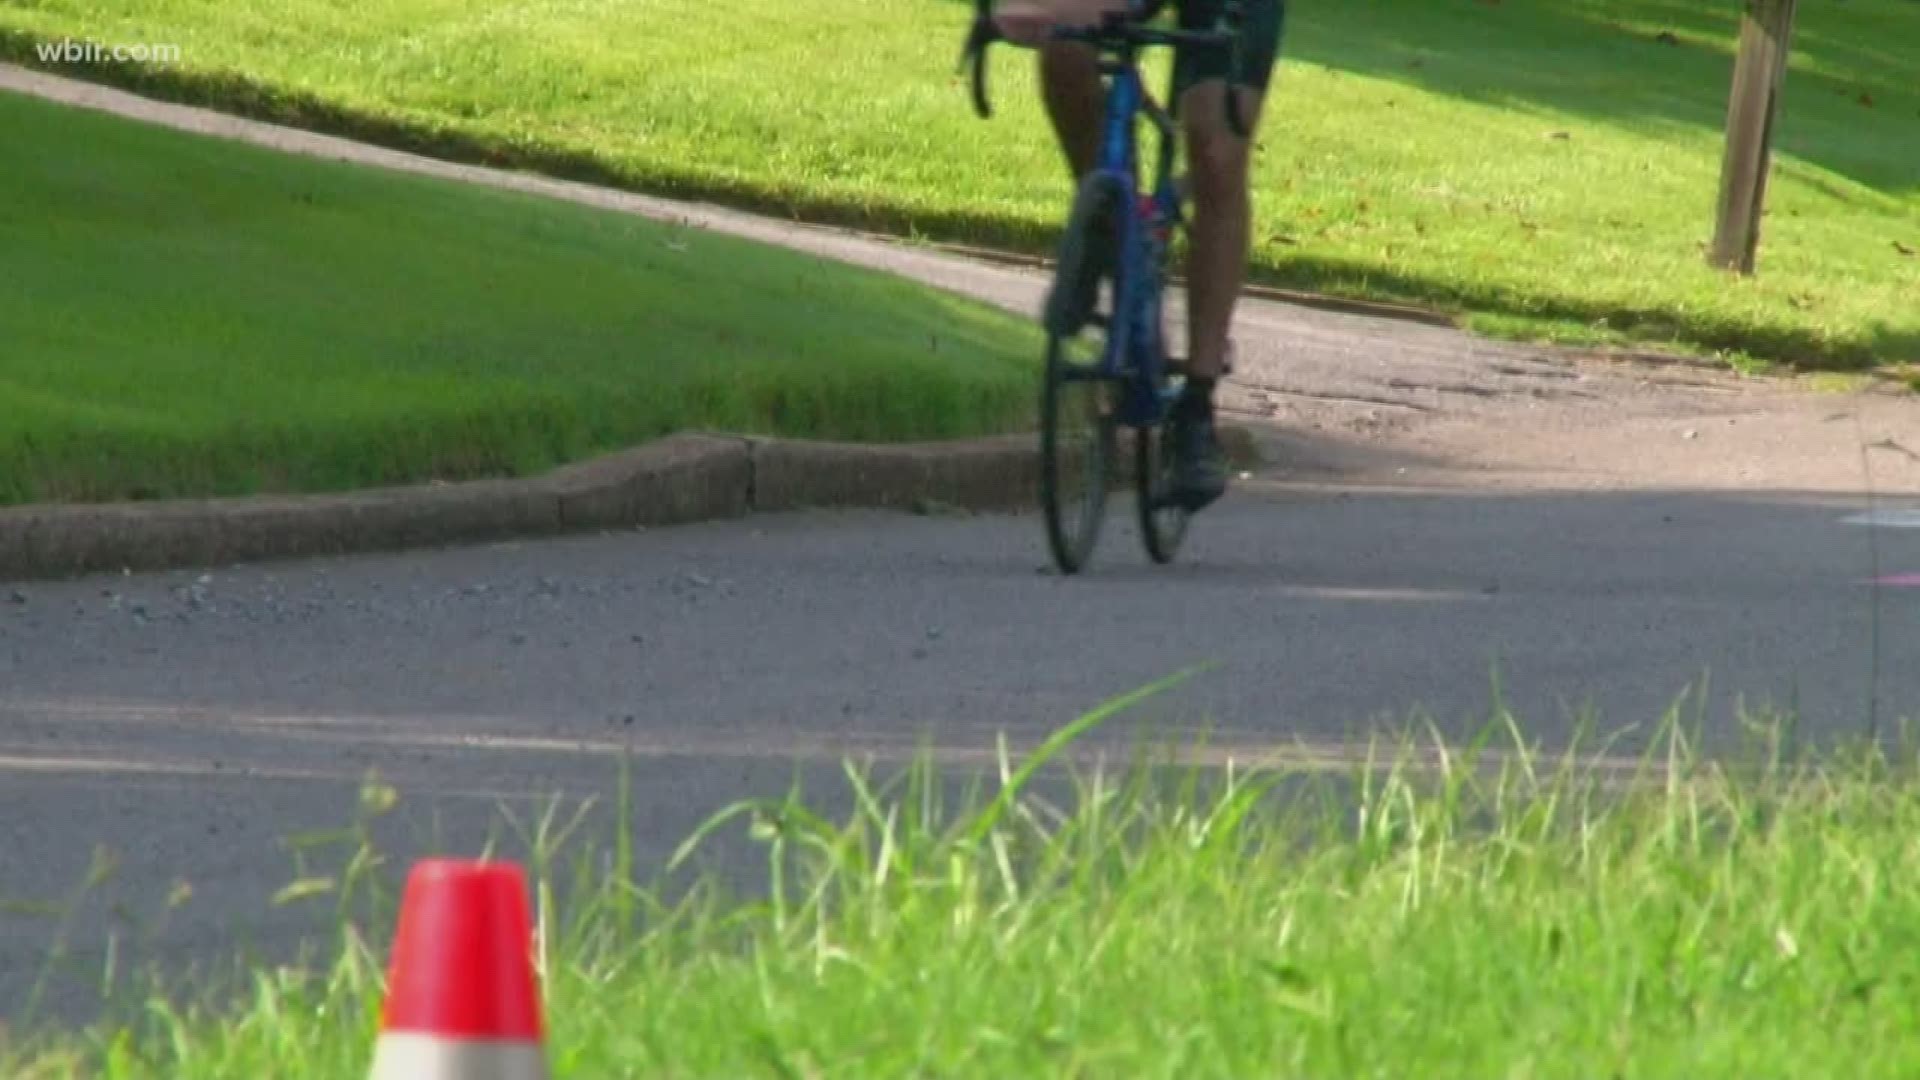 Knoxville police say they are still searching for a man accused of attacking a woman on a west Knoxville greenway.